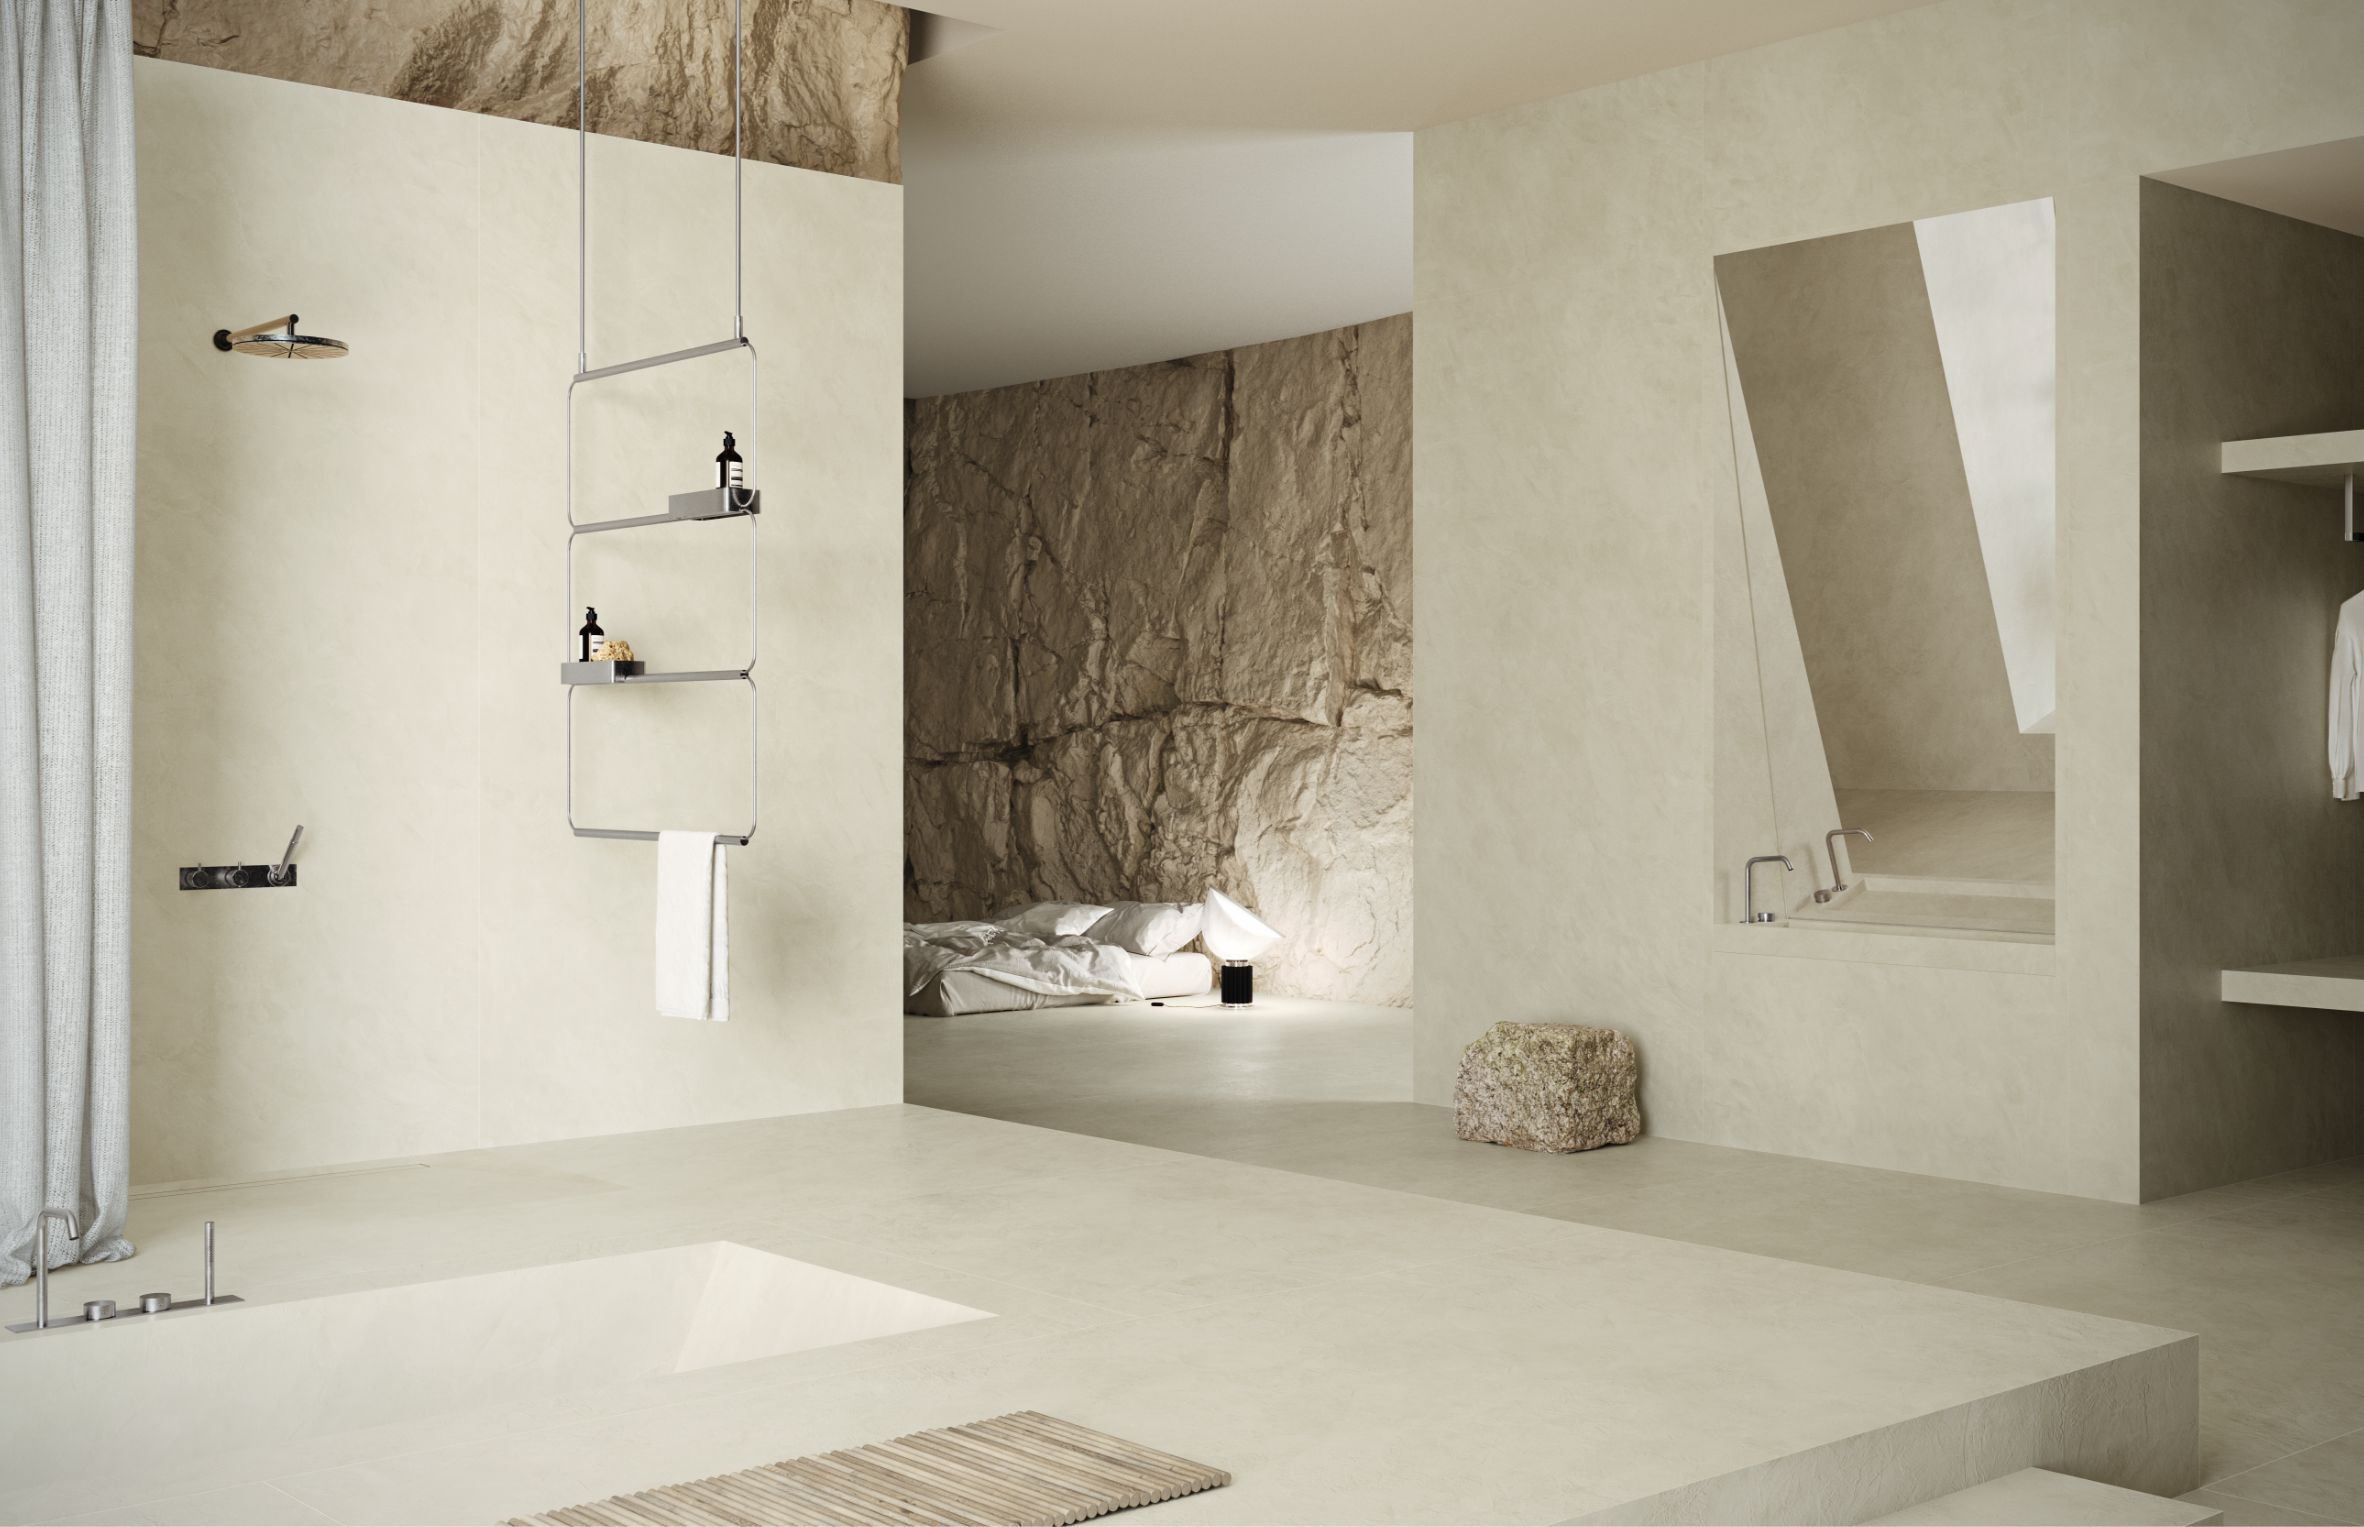 Image of MUT THE RESILIENT HOUSE IMAGEN GENERAL in The Resilient House: the bathroom by MUT Design that evokes Roman baths and nods to stone quarries - Cosentino